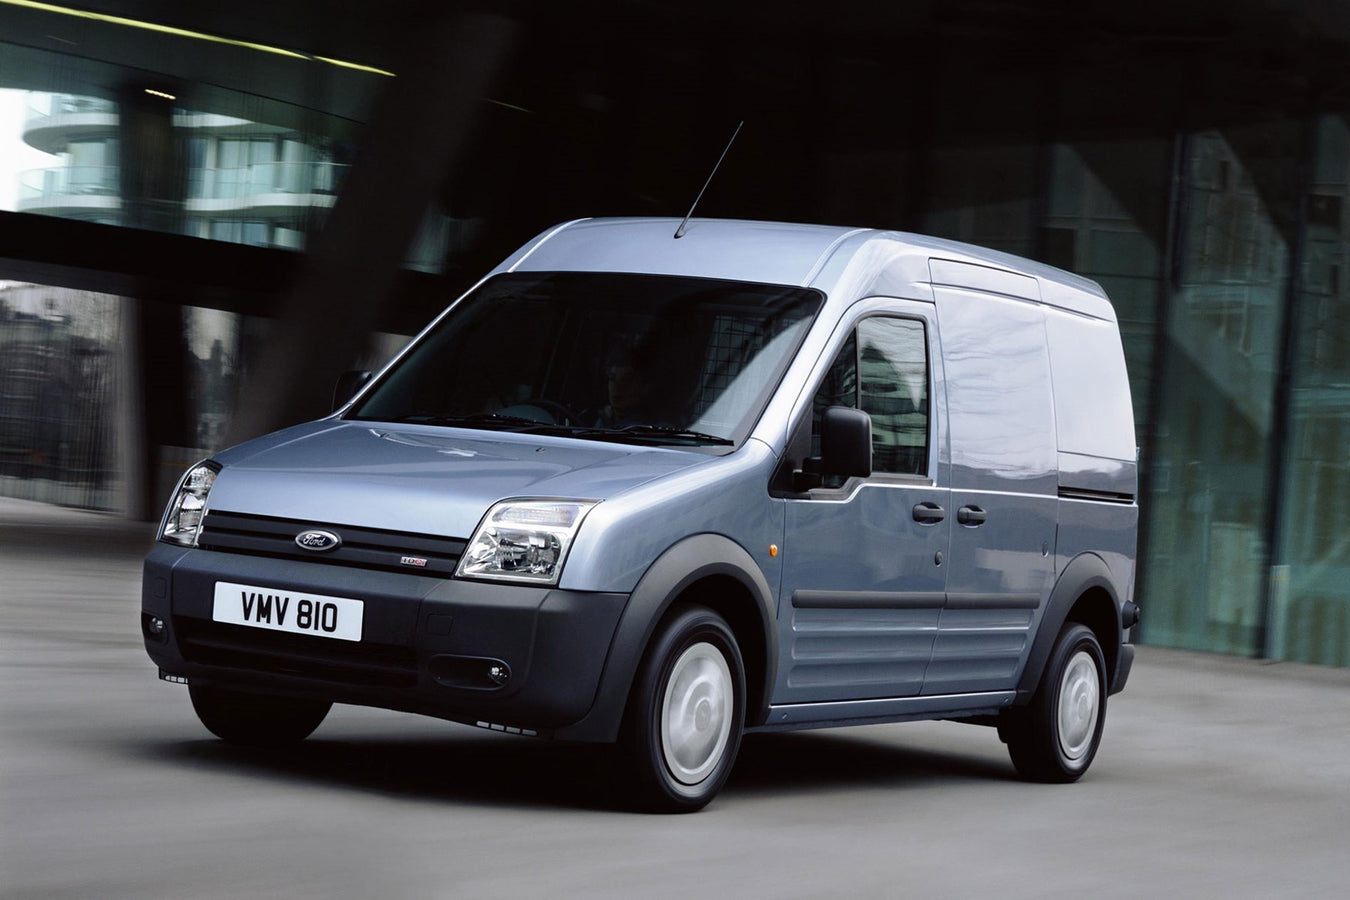 Ford Transit Connect 2002 - 2013